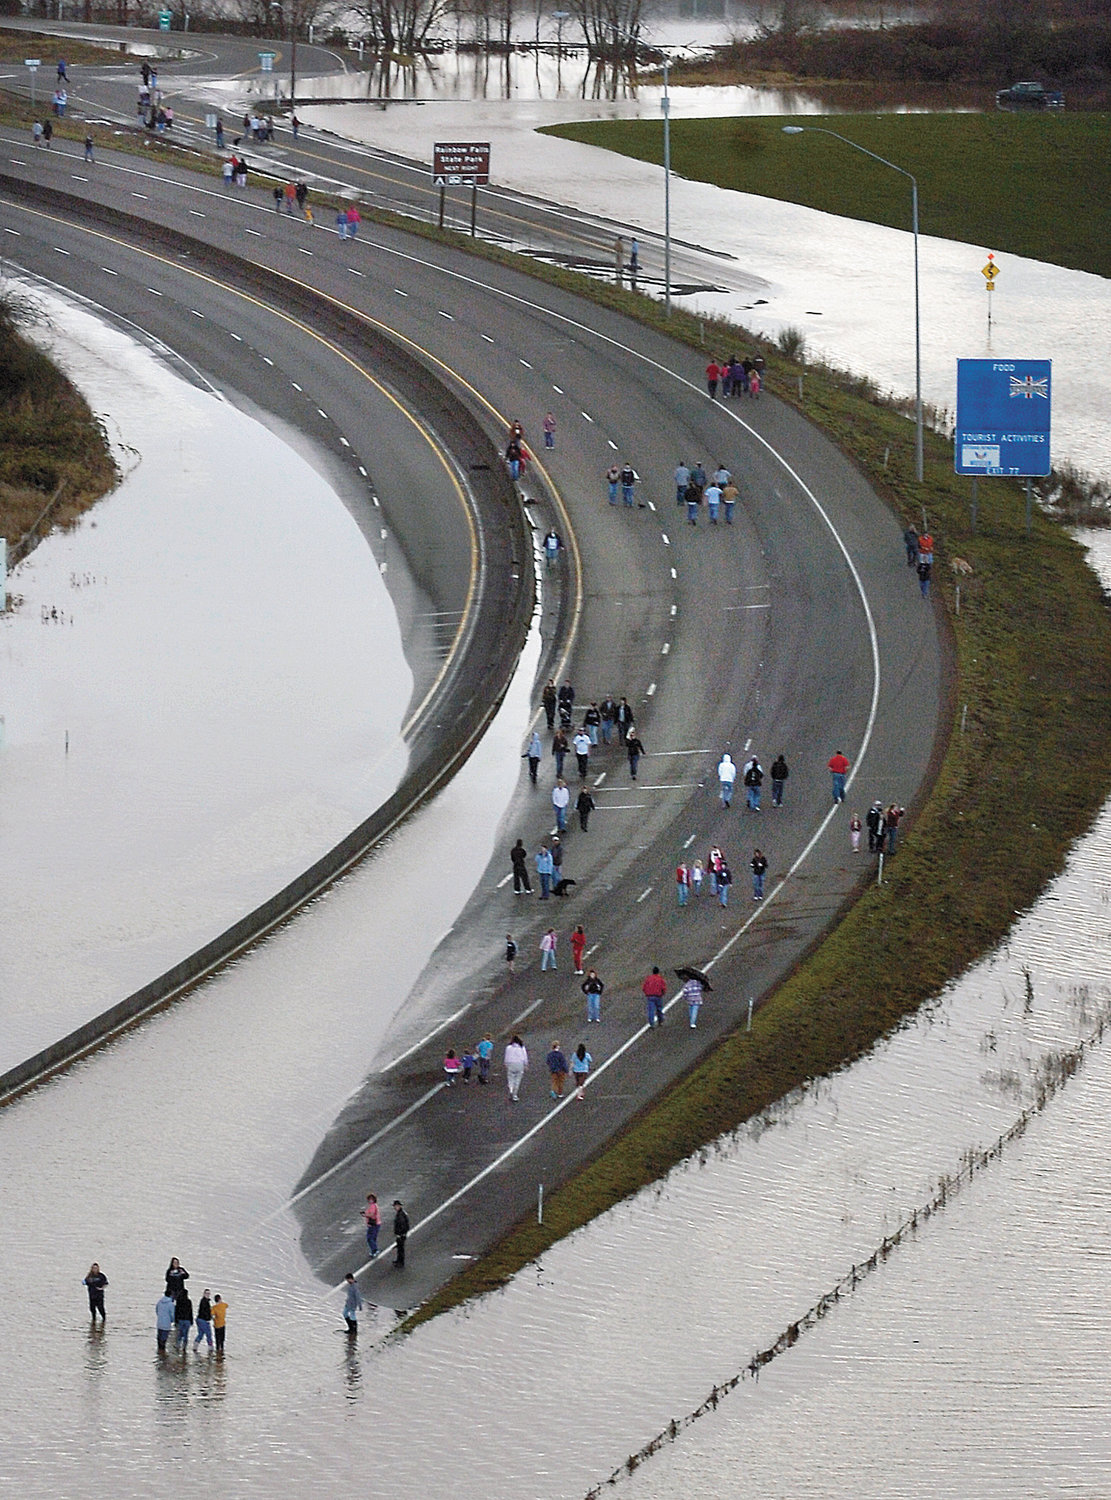 People gather on the lanes of flooded Interstate 5 near Chehalis on Tuesday, Dec. 4, 2007 after severe flooding in Lewis County, Washington caused the major north/south freeway to shut down.